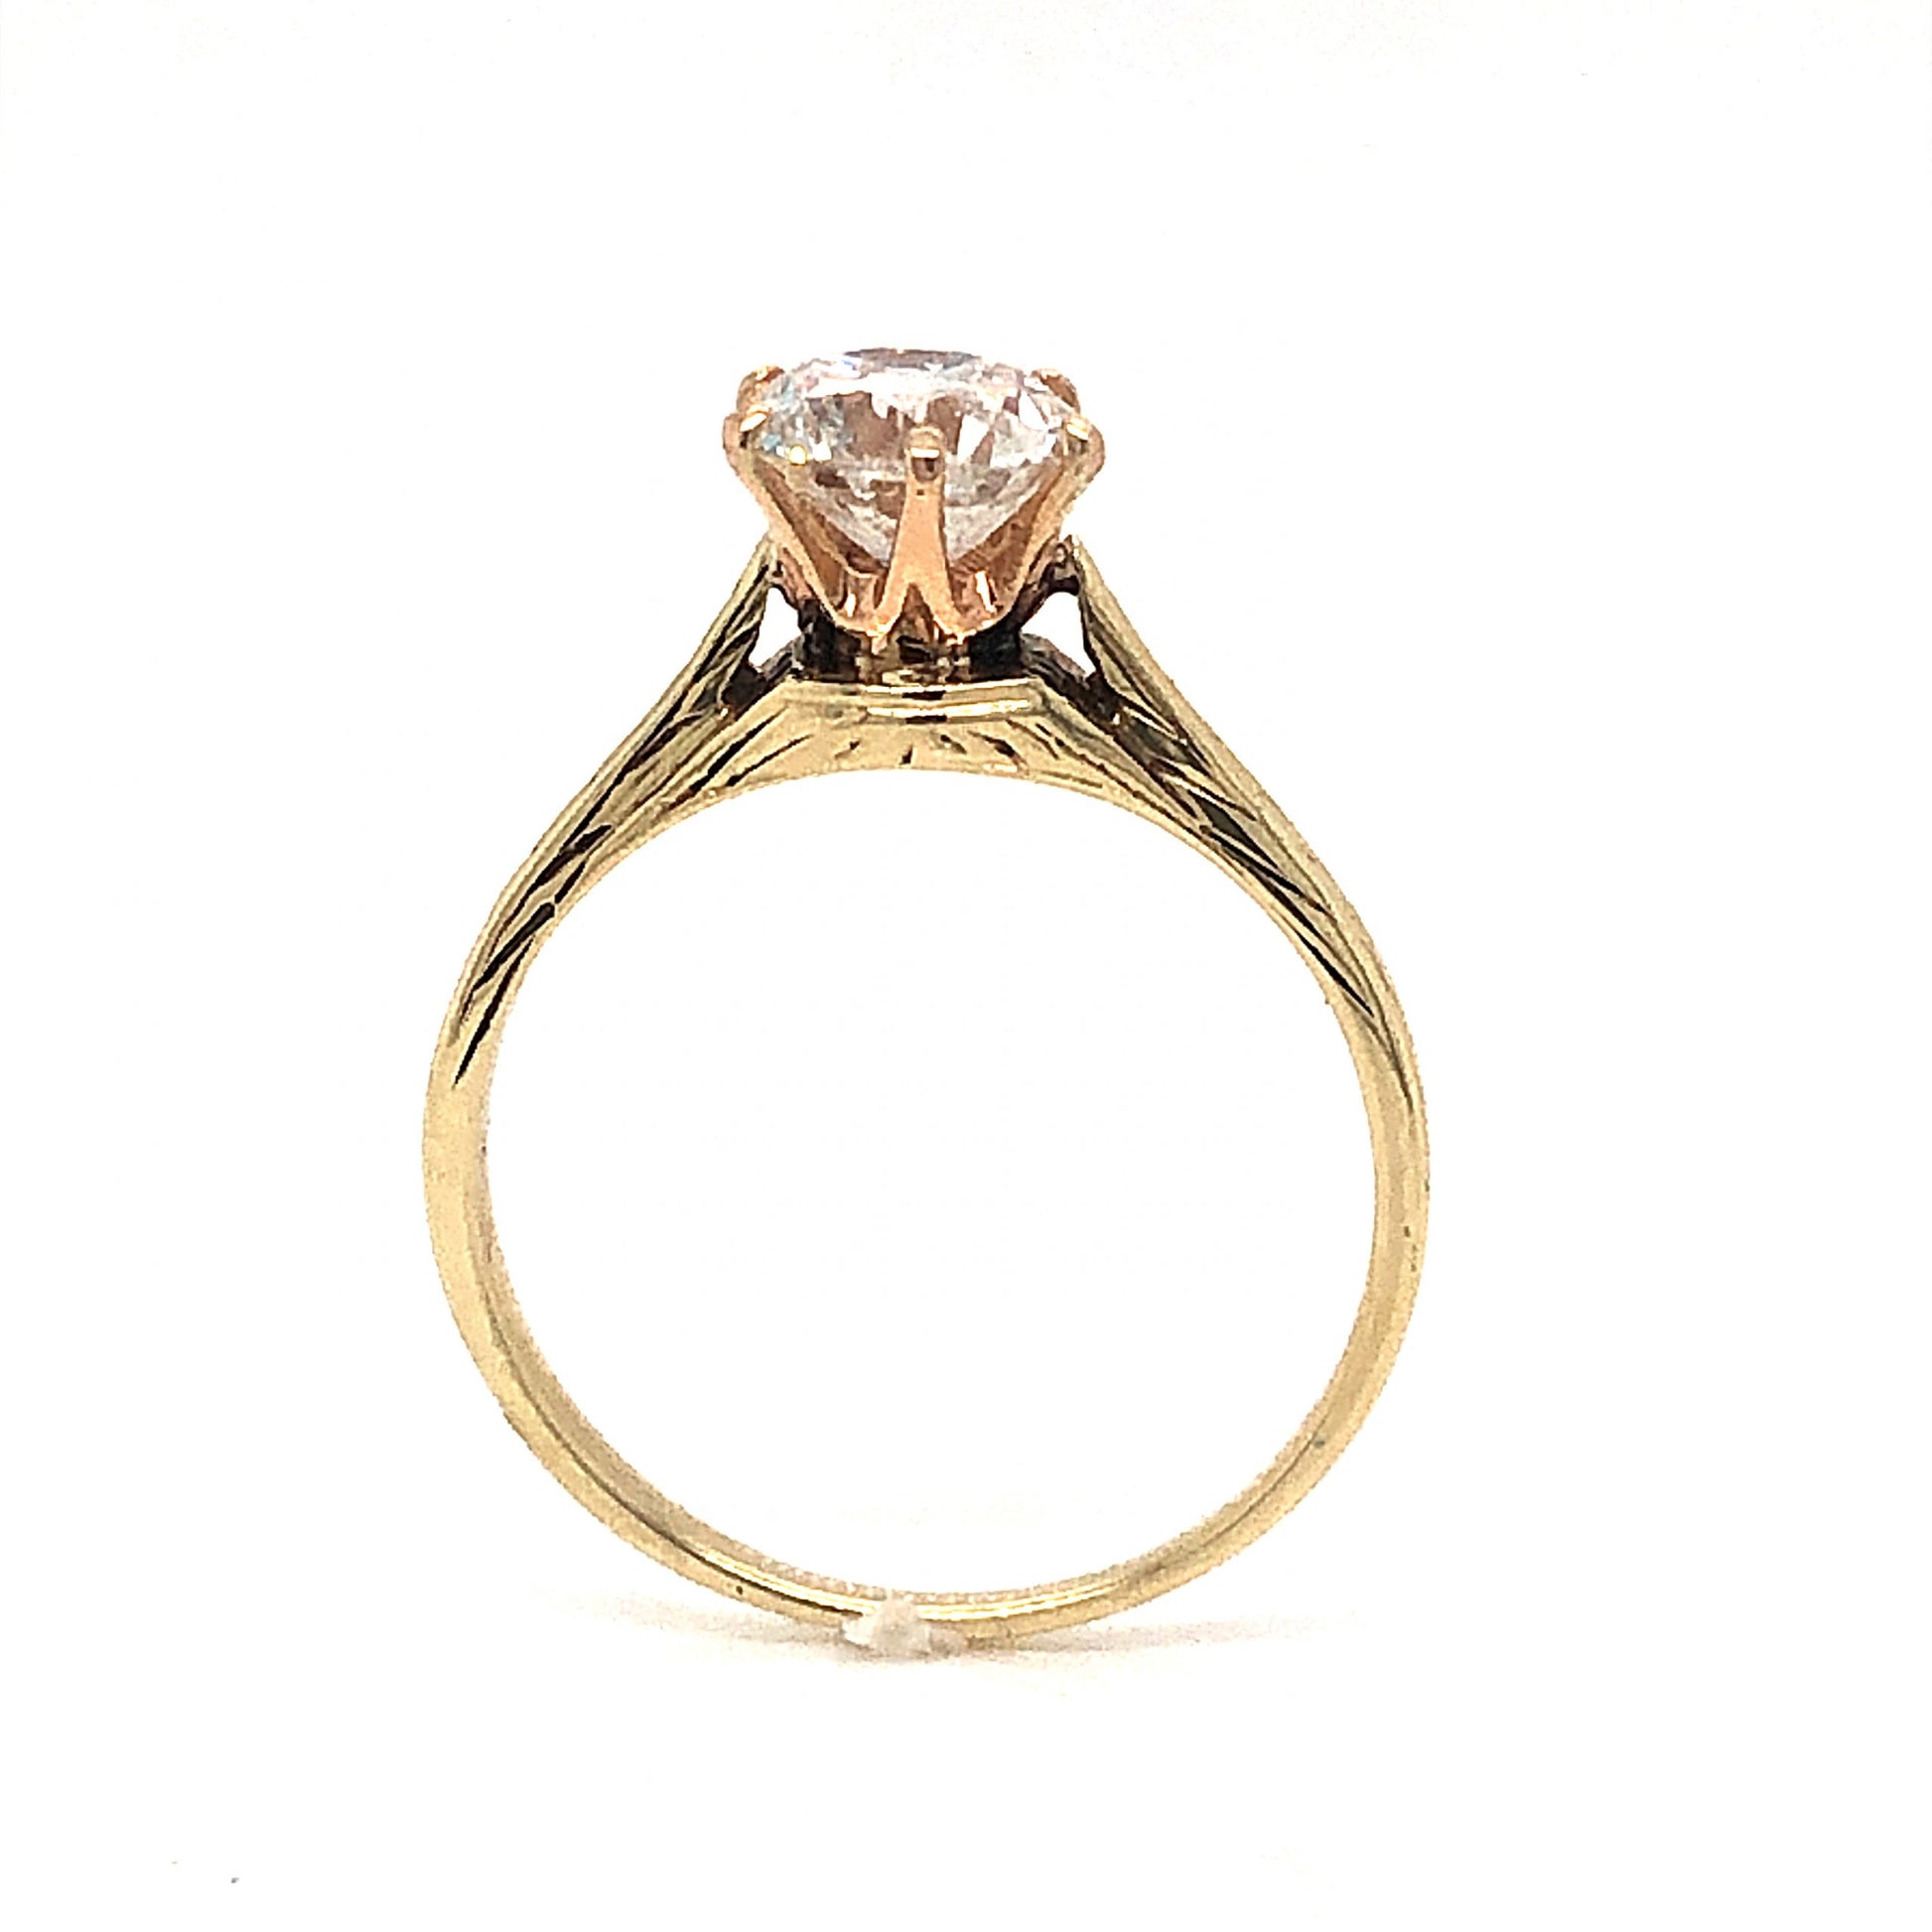 Victorian Engraved Solitaire Diamond Engagement Ring in 14kComposition: 14 Karat Yellow Gold/14 Karat Rose Gold Ring Size: 5.5 Total Diamond Weight: 1.02ct Total Gram Weight: 2.1 g